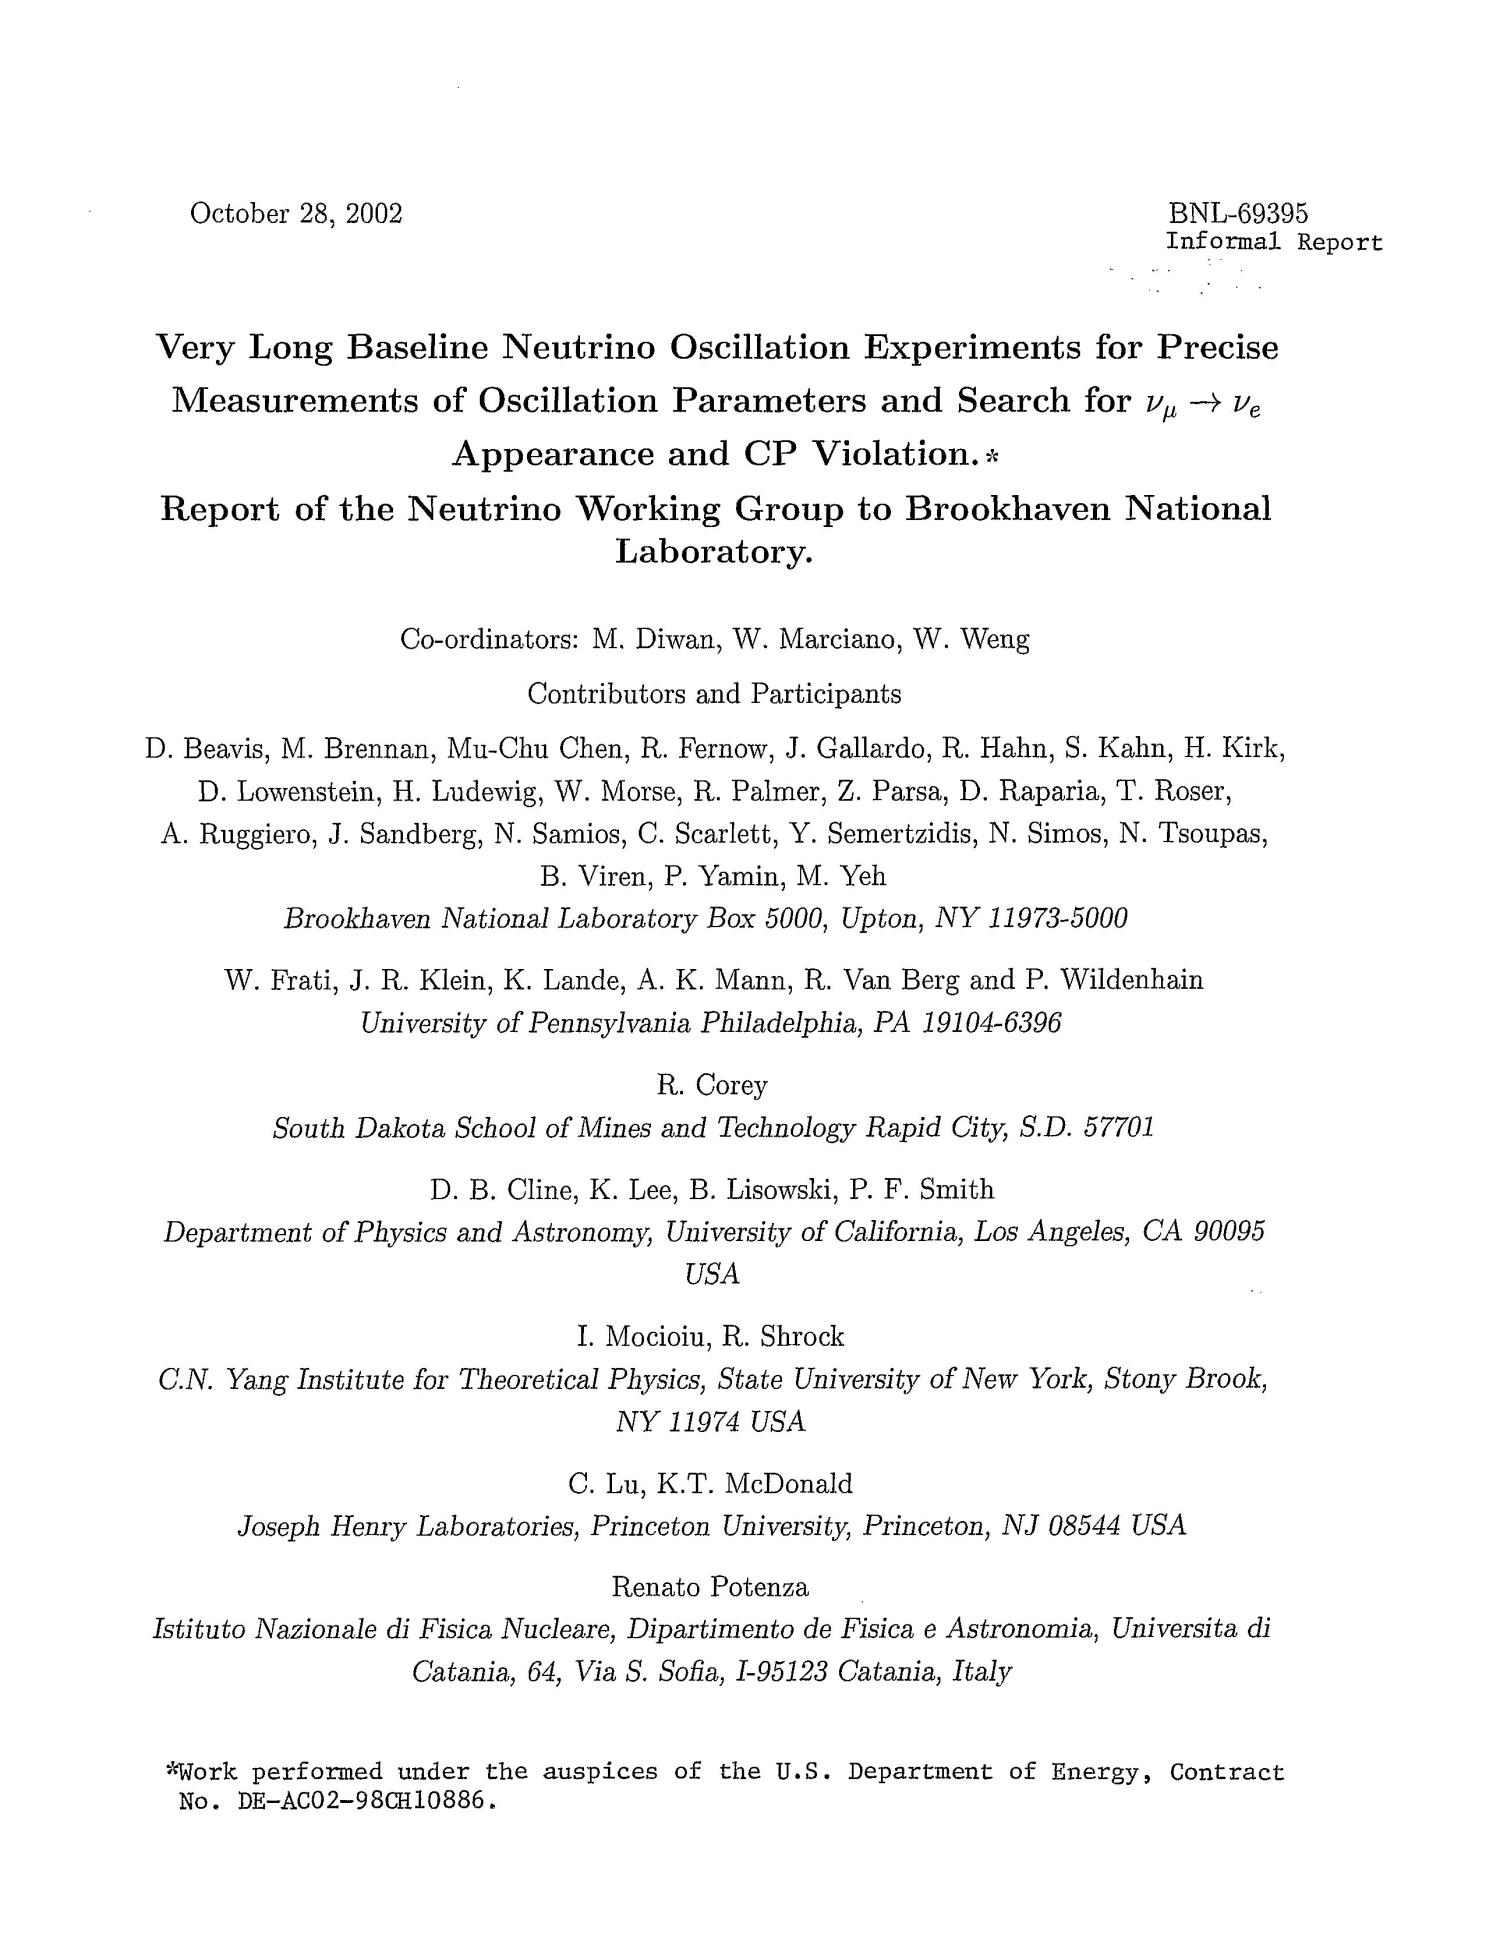 Very Long Baseline Neutrino Oscillation Experiments For Precise Measurments Of Oscillation Parameters And Search For N Mu Yields N Epsilon Unt Digital Library